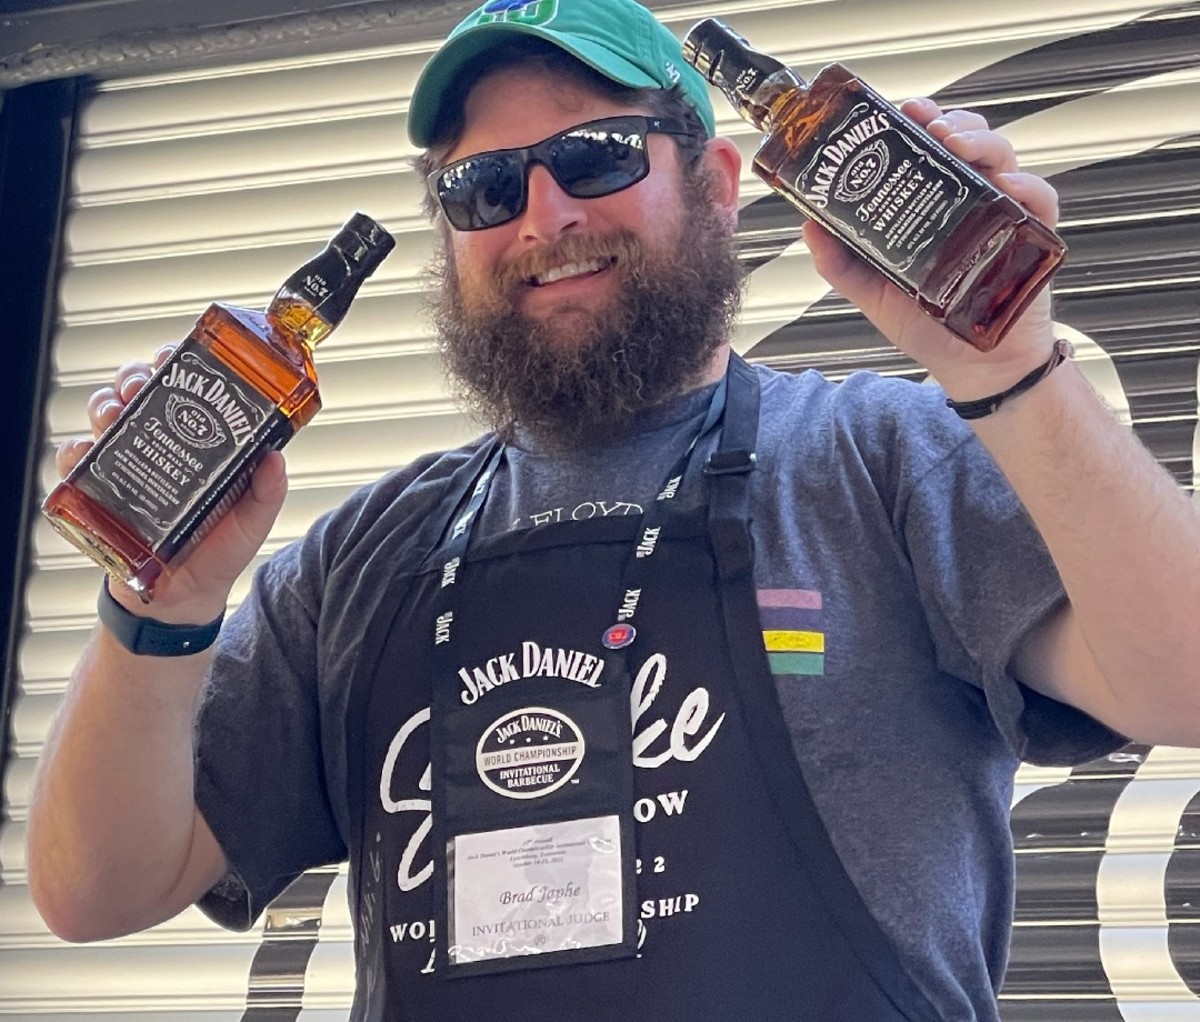 Brad Japhe, writer and judge at the Jack Daniel's BBQ competition. Holding two bottles of Jack Daniel's whiskey.